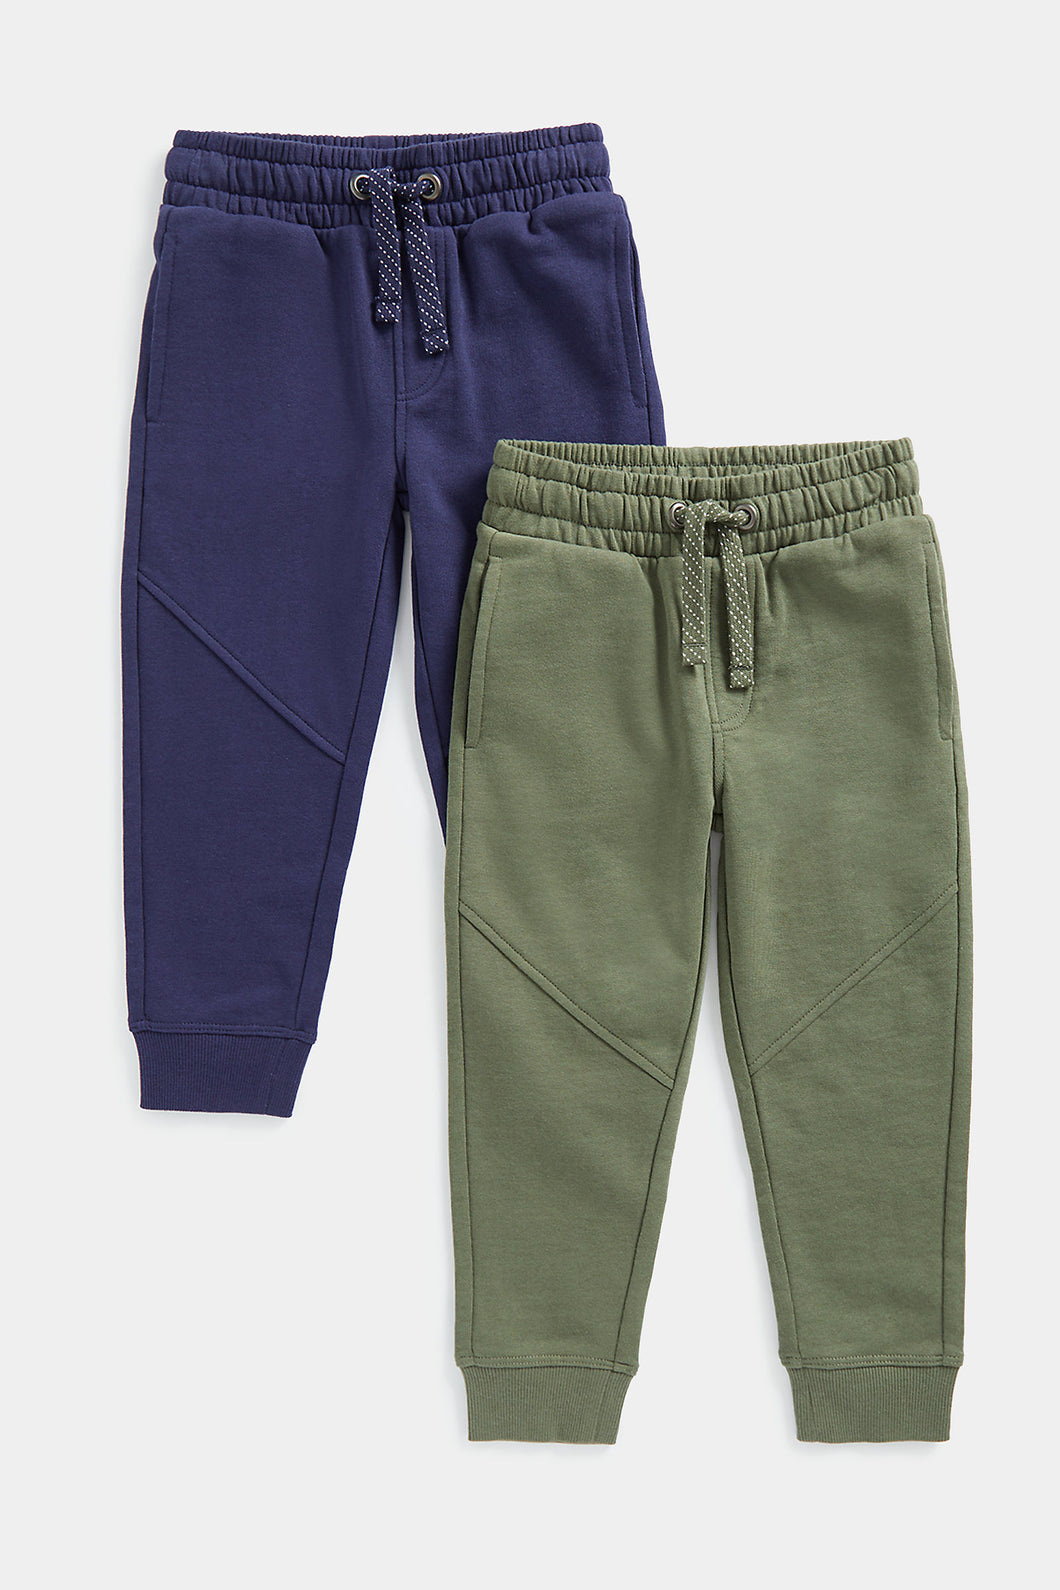 Mothercare Navy and Khaki Joggers - 2 Pack